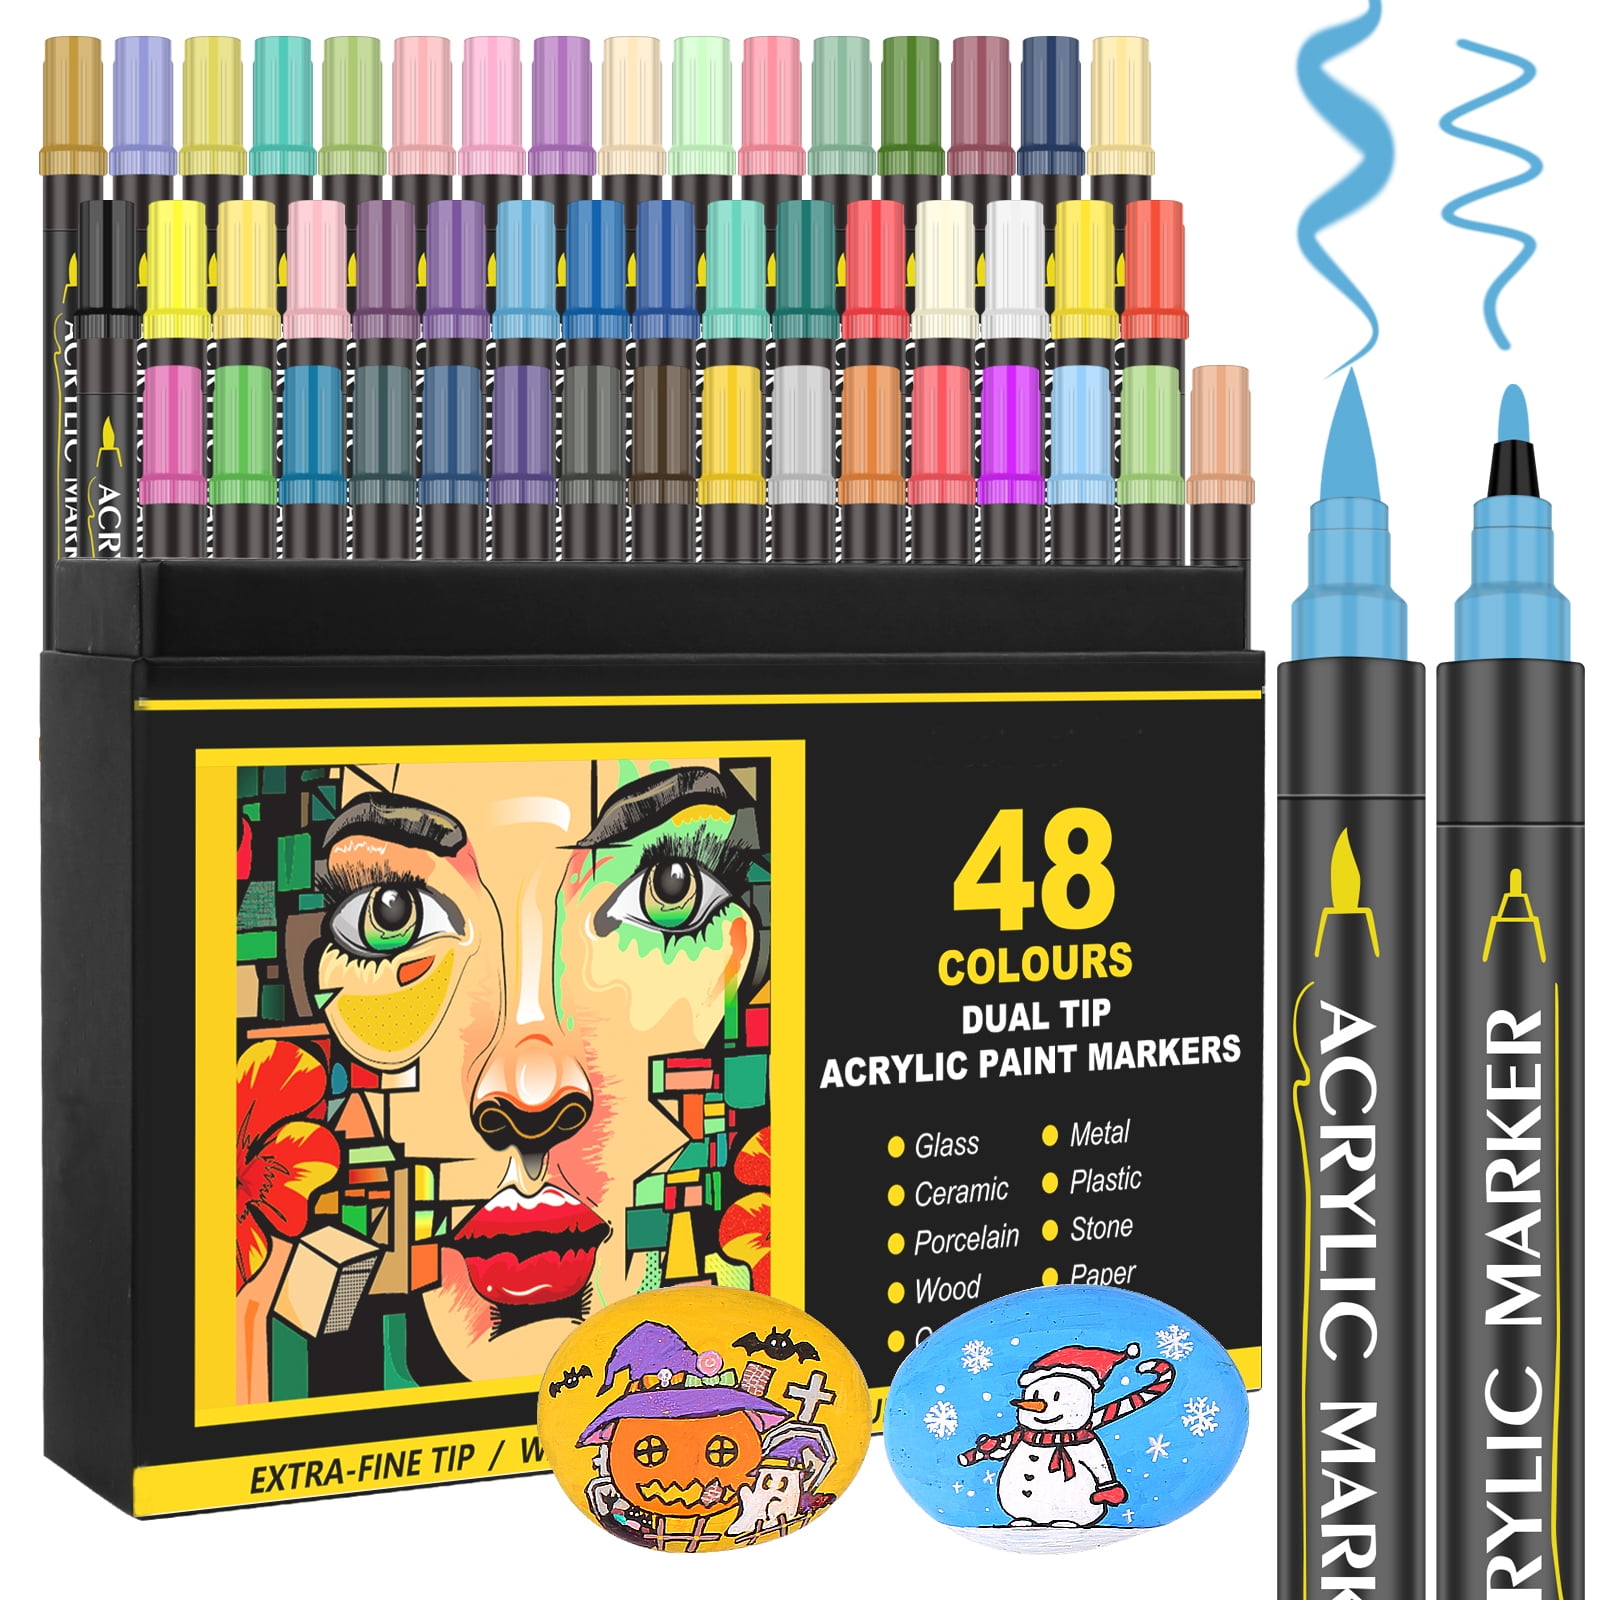 LIGHTWISH 48 Colors Acrylic Paint Markers,Upgraded Dual Tip and Dual Colors Acrylic  Paint Pens,Waterproof,Never Fade Paint Markers for rock  painting,wood,fabric,glass,canvas,stone,diy crafts - Yahoo Shopping